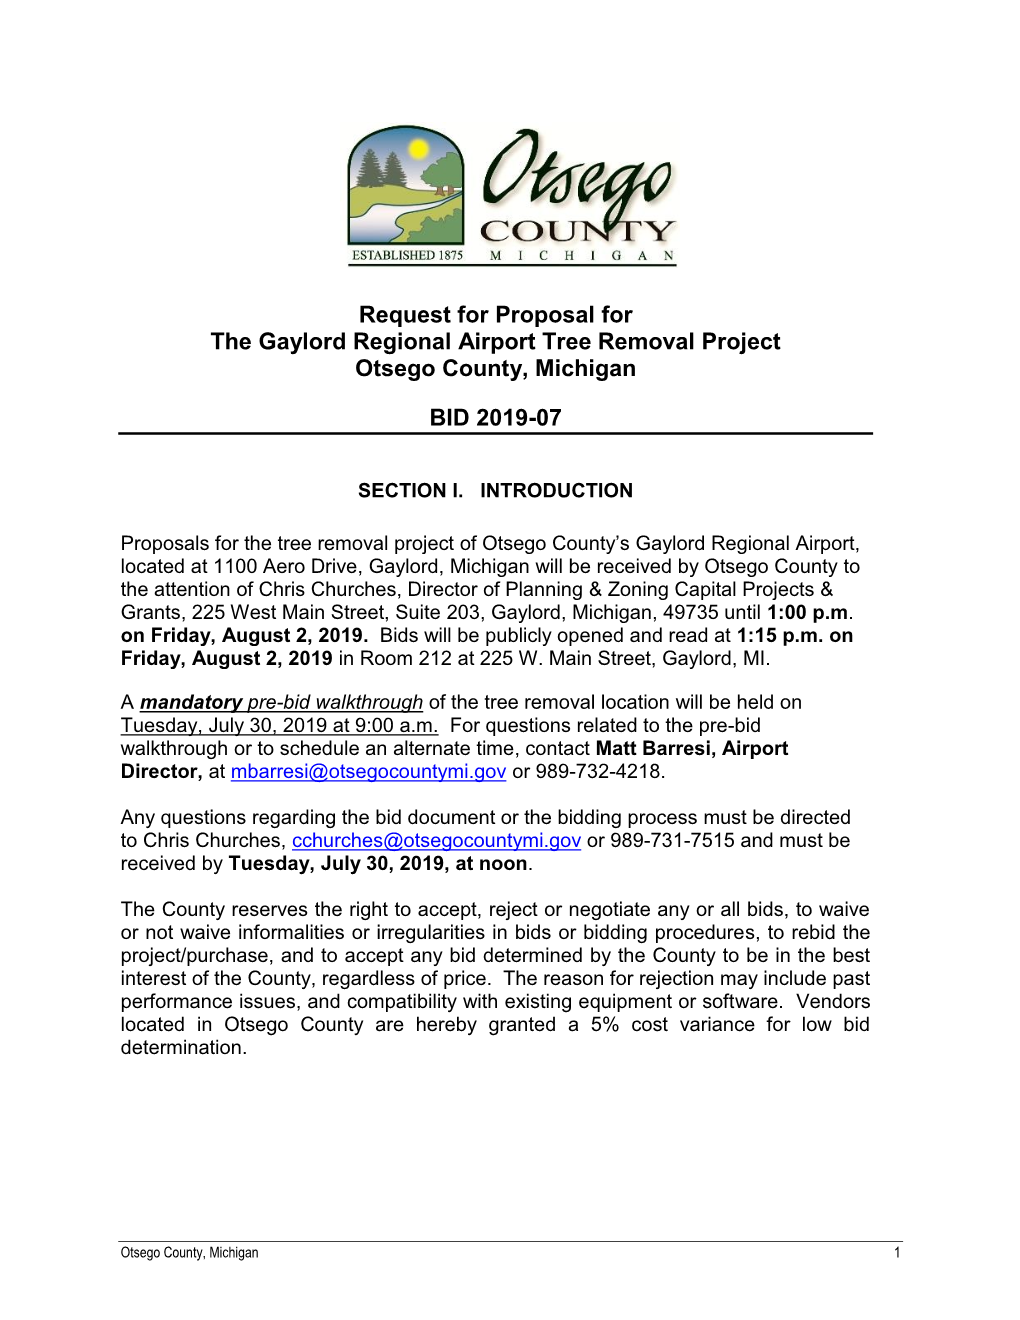 Request for Proposal for the Gaylord Regional Airport Tree Removal Project Otsego County, Michigan